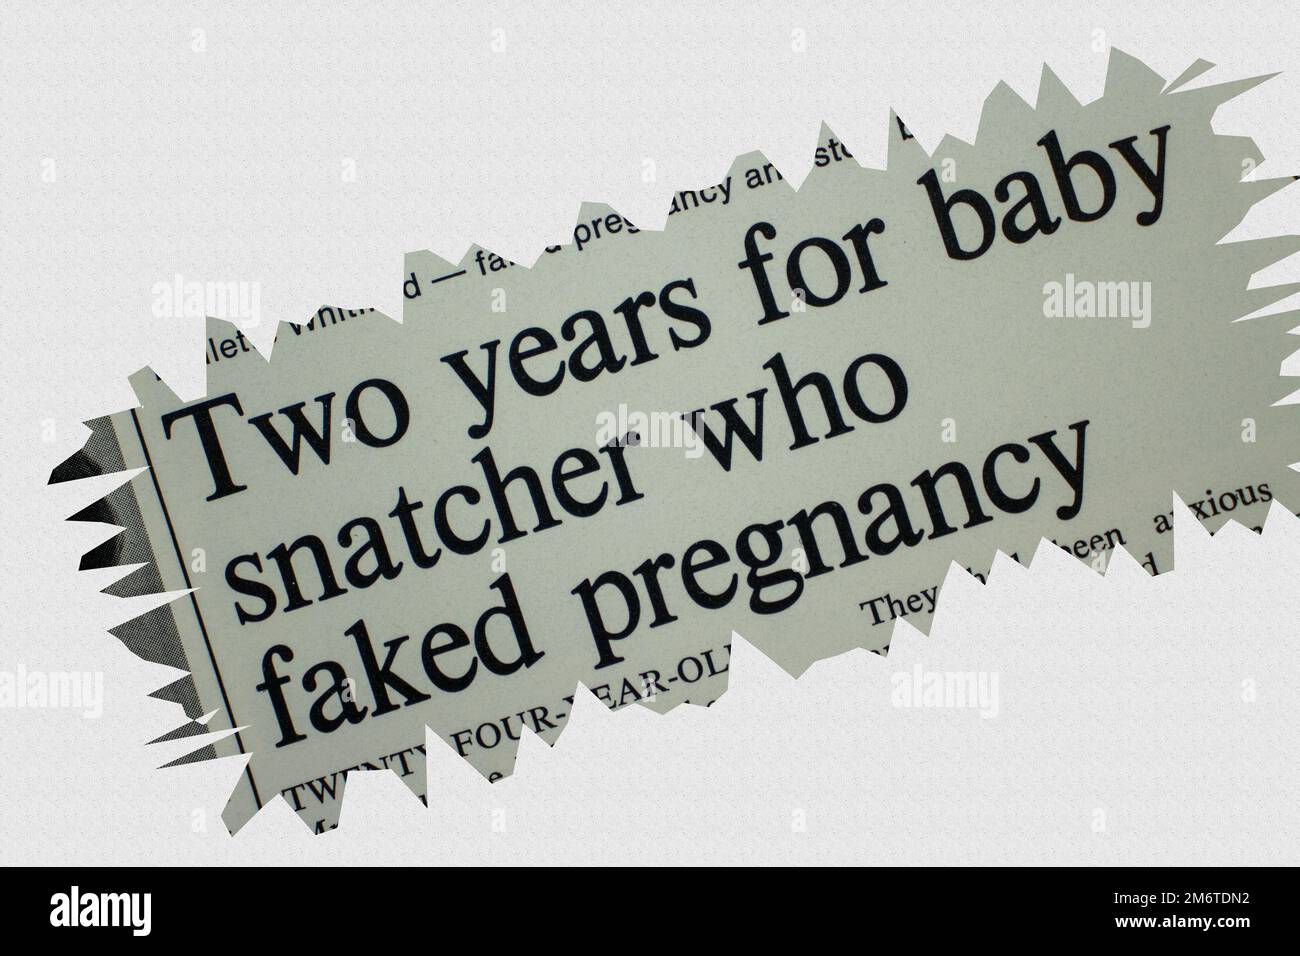 Two years for baby snatcher who faked pregnancy - news story from 1975 newspaper headline article title with overlay Stock Photo